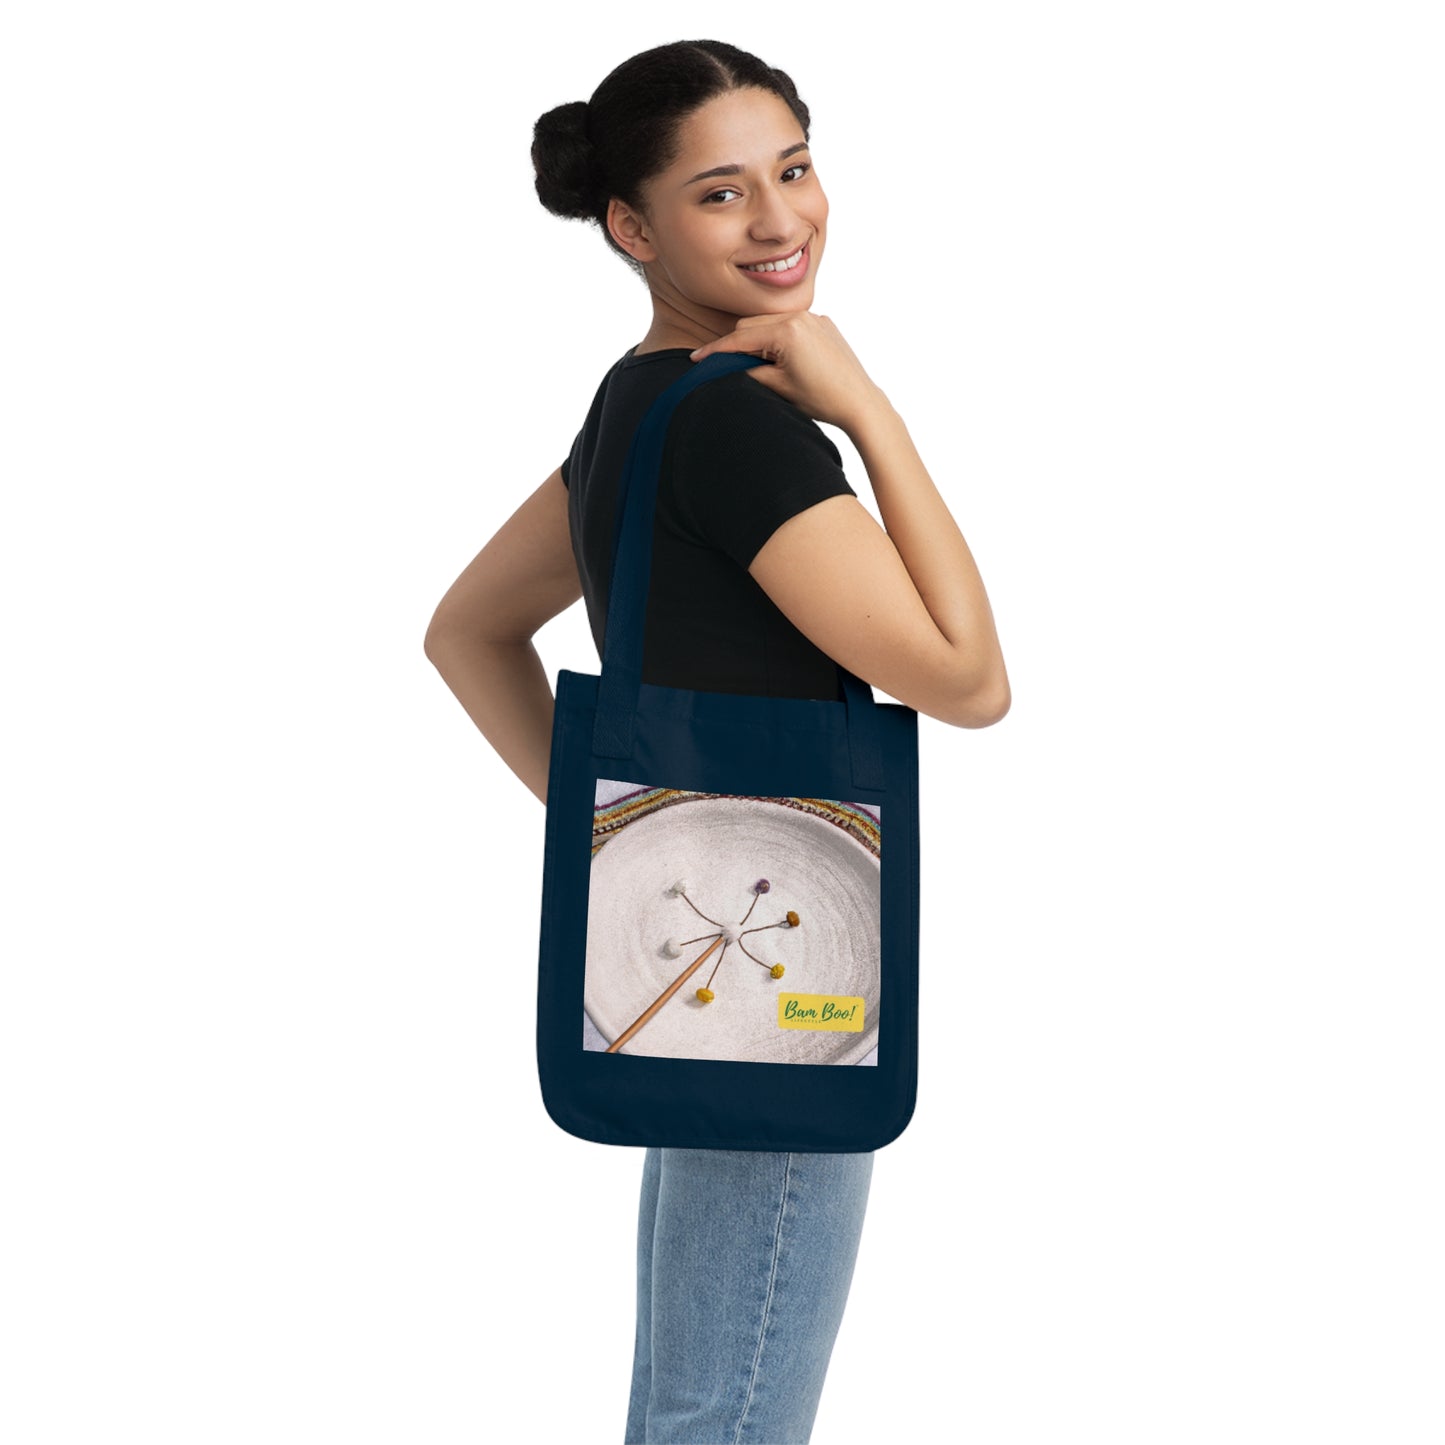 "Nature's Intertwined Form: Exploring the Beauty of Earth Through Photography and Painting" - Bam Boo! Lifestyle Eco-friendly Tote Bag